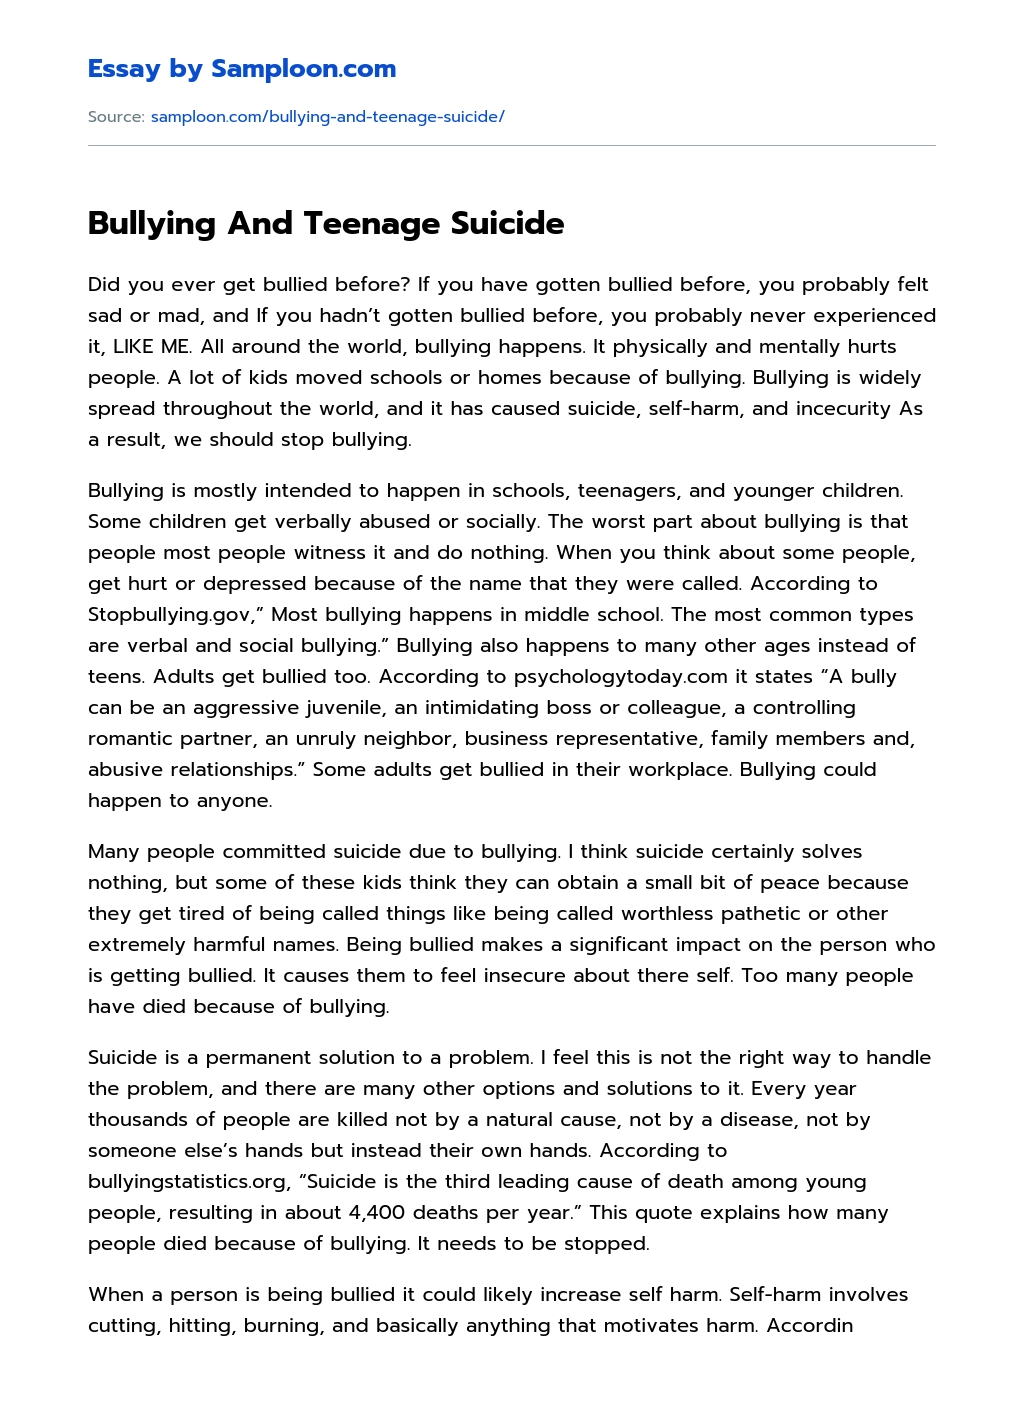 bullying and suicide essay